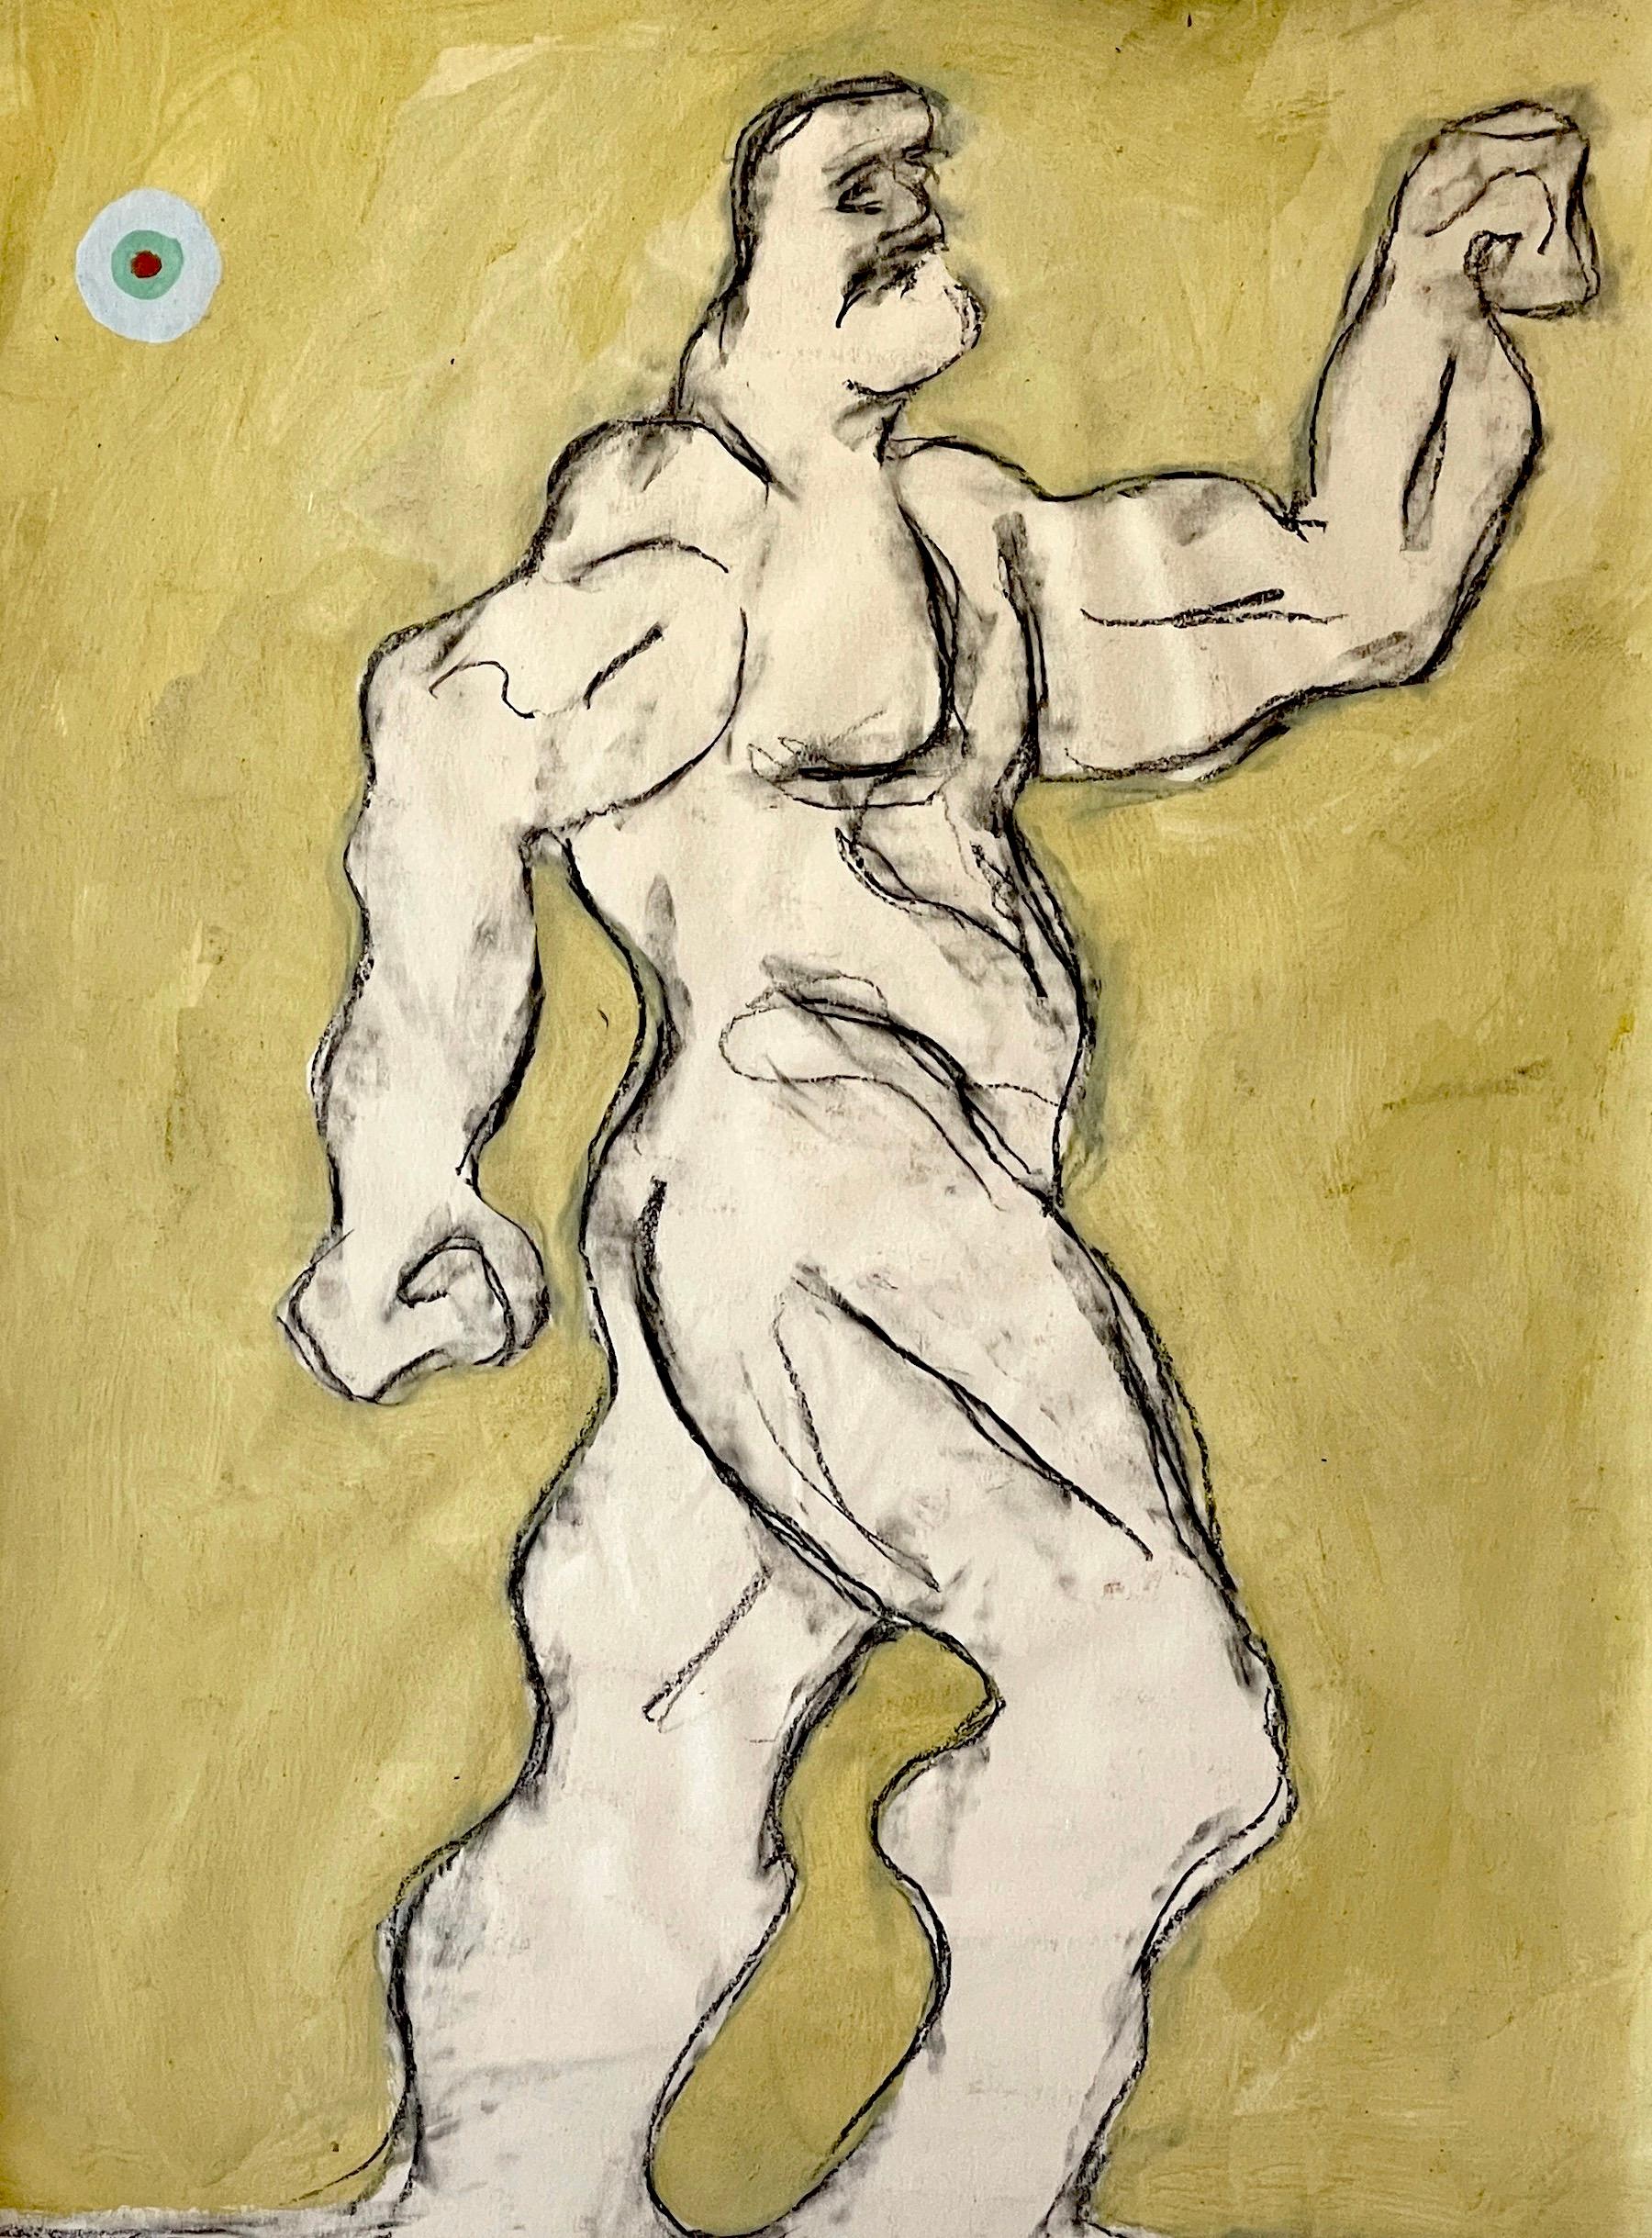 American 'Hercules' Oil/Mixed Media on Paper, 1960s by Douglas D. Peden For Sale